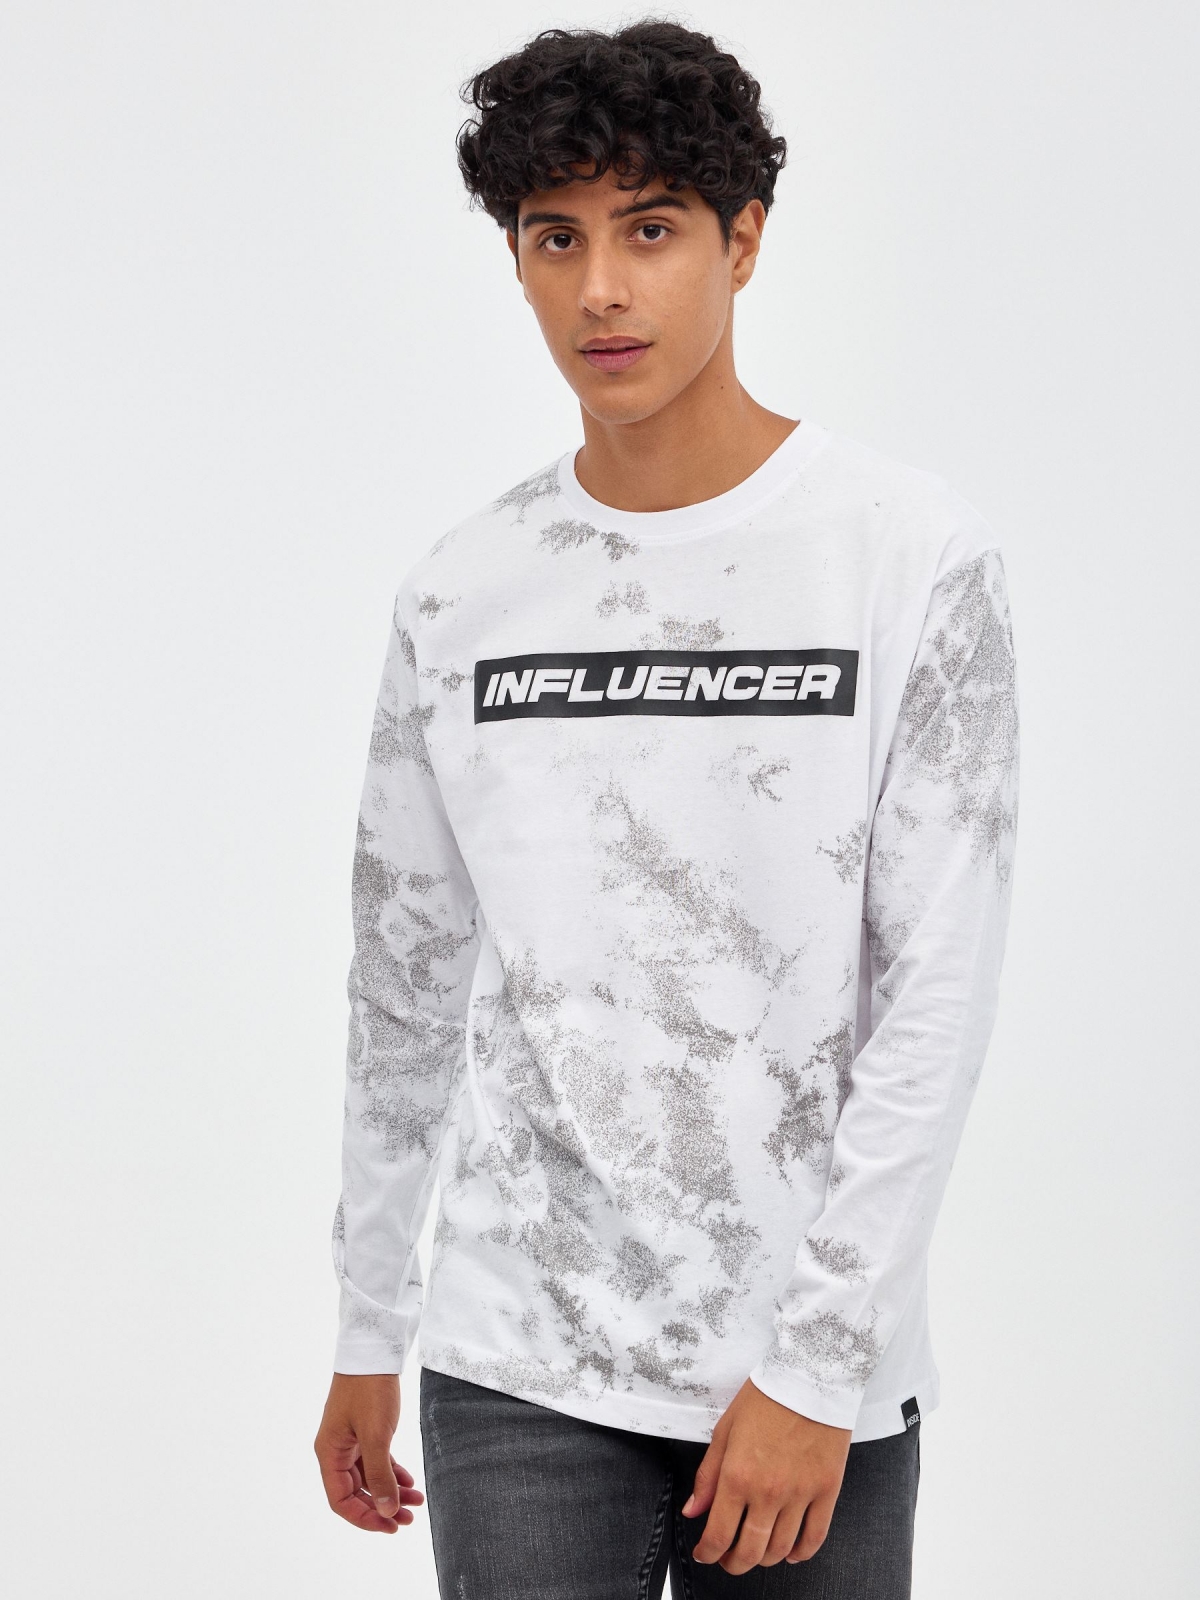 Influencer T-shirt white middle front view